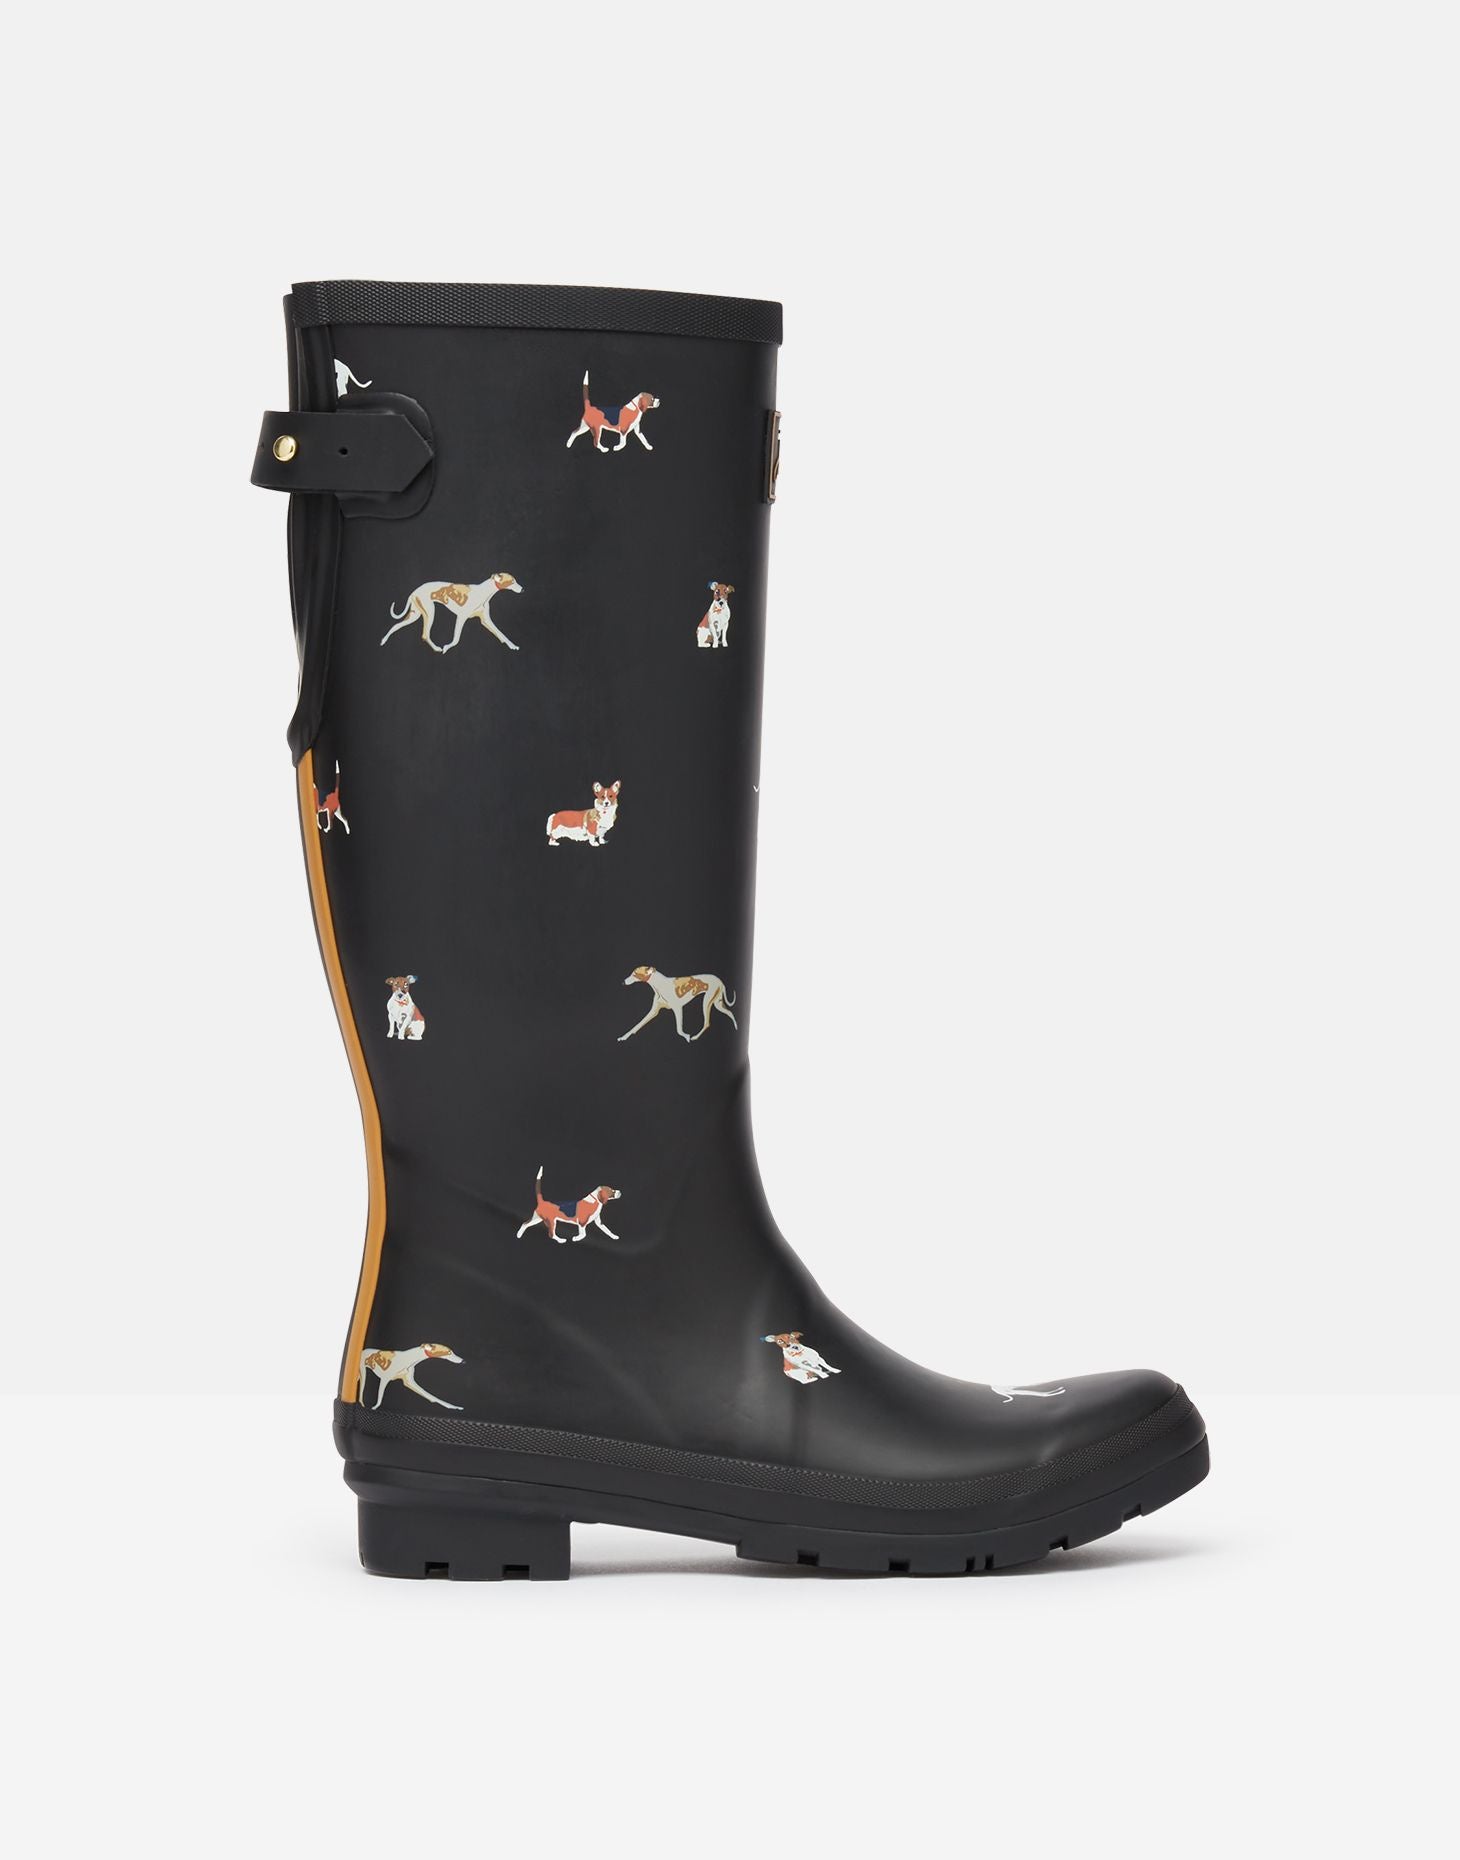 Women's Printed Wellies With Adjustable Back Gusset - Black Dogs